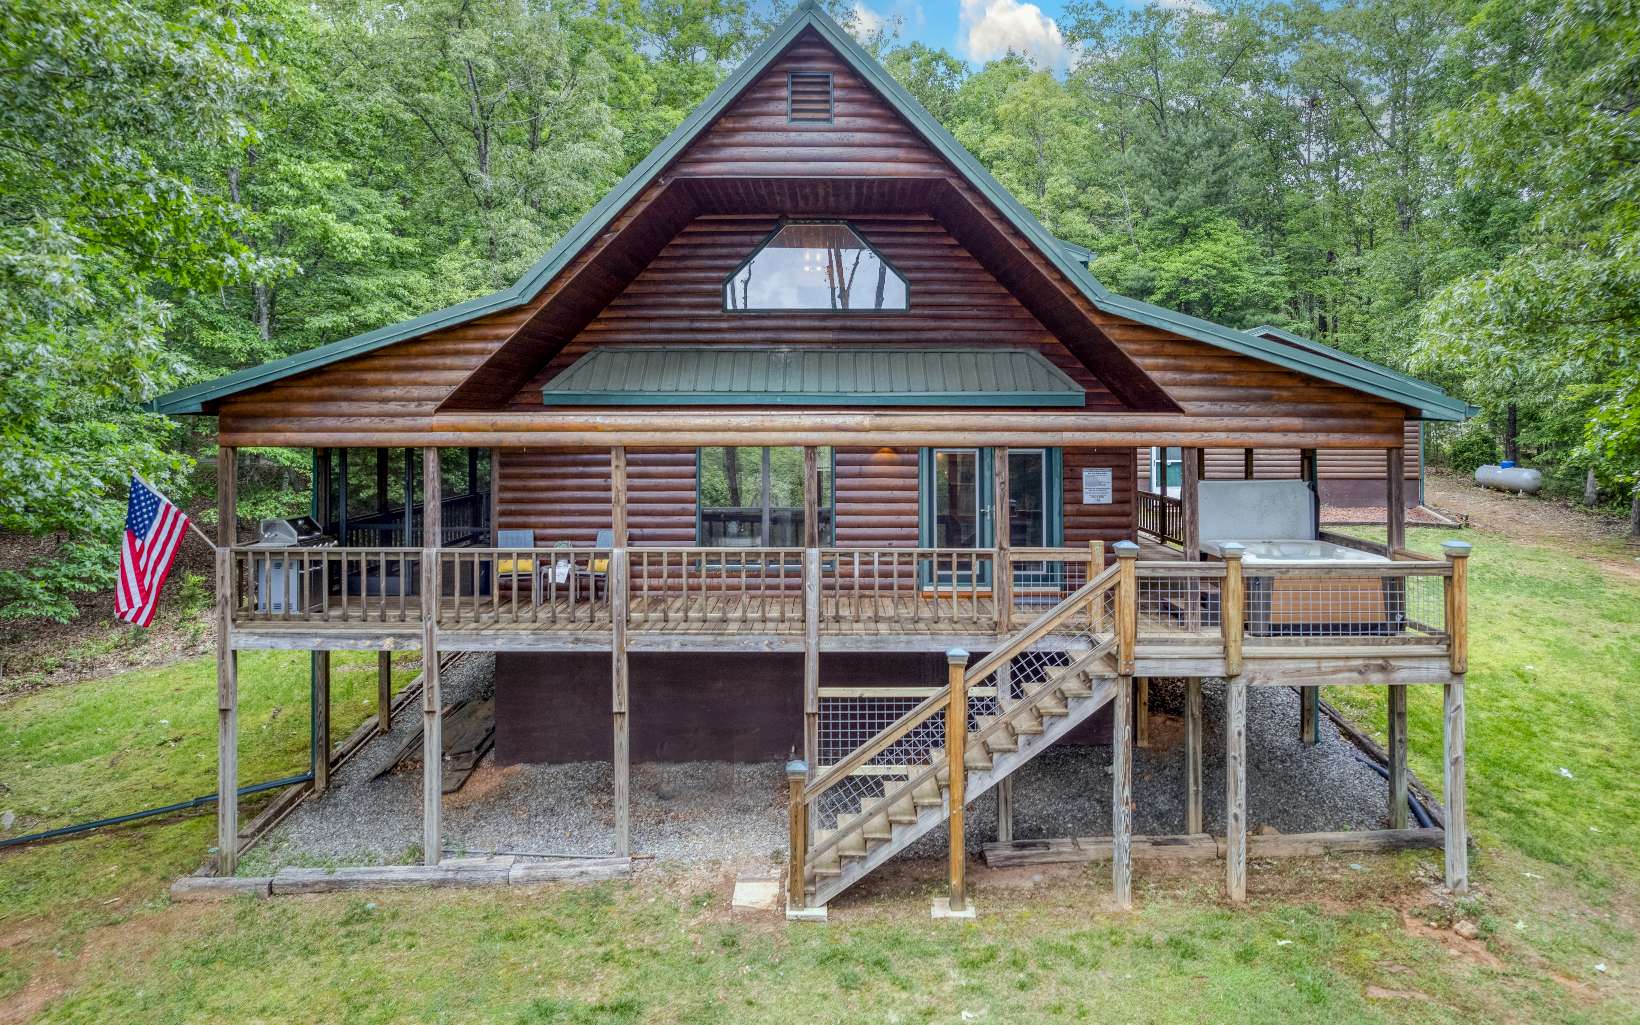 This cabin is as cozy as gets and comes with an impeccable view, 3 large private bedrooms, 2 full baths with beautiful showers and a soaking tub!! 2 bedrooms have brand new 42" smart TVs already mounted. Enjoy entertaining in one of the many luxurious spaces this home has to offer. Get the vacation started on the deck while relaxing in the bed swing or hot tub overlooking the views! Relax with a refreshing beverage from the fridge in the huge chef's kitchen with tons of storage, beautiful granite, and subway tile. Enjoy a hot beverage while staying warm by the fire-pit! New paint throughout the home as well as an added on cell phone service booster and a Generac generator that can power the whole house. Park in your oversized, detached workshop/garage or on the HUGE circular driveway. Haven at Thomas Mountain is privately tucked away only 15 min from downtown Blue Ridge, Lake Blue Ridge Marina and Aska Adventure Area. This is the perfect retreat for full time living or a successful short term rental investment opportunity! Furnishings are negotiable on a separate bill of sale.